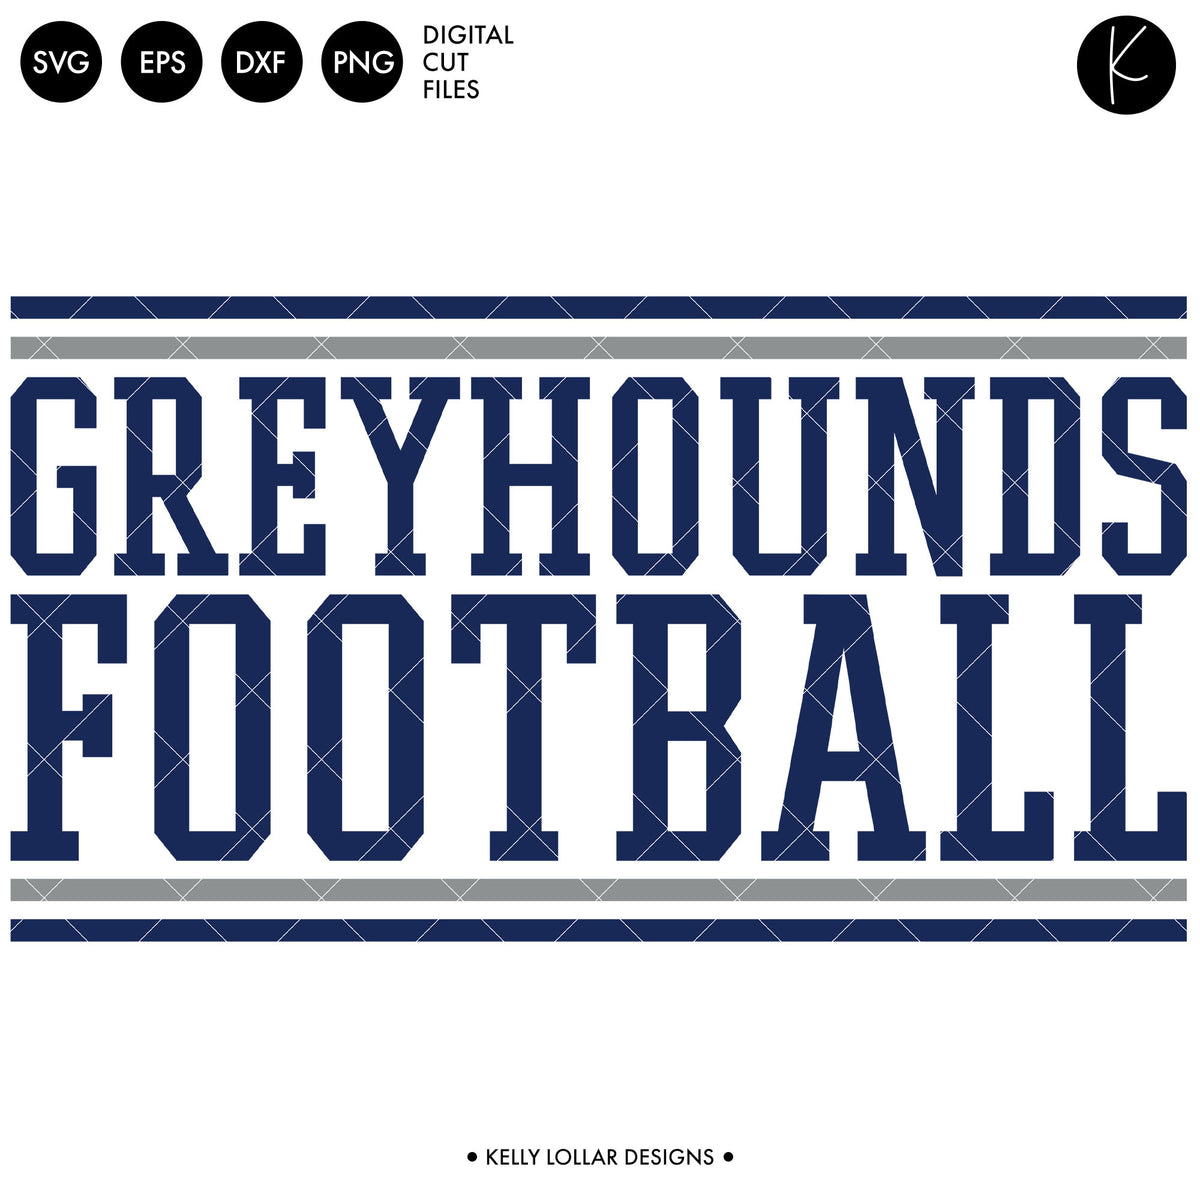 Greyhounds Soccer and Football Bundle | SVG DXF EPS PNG Cut Files